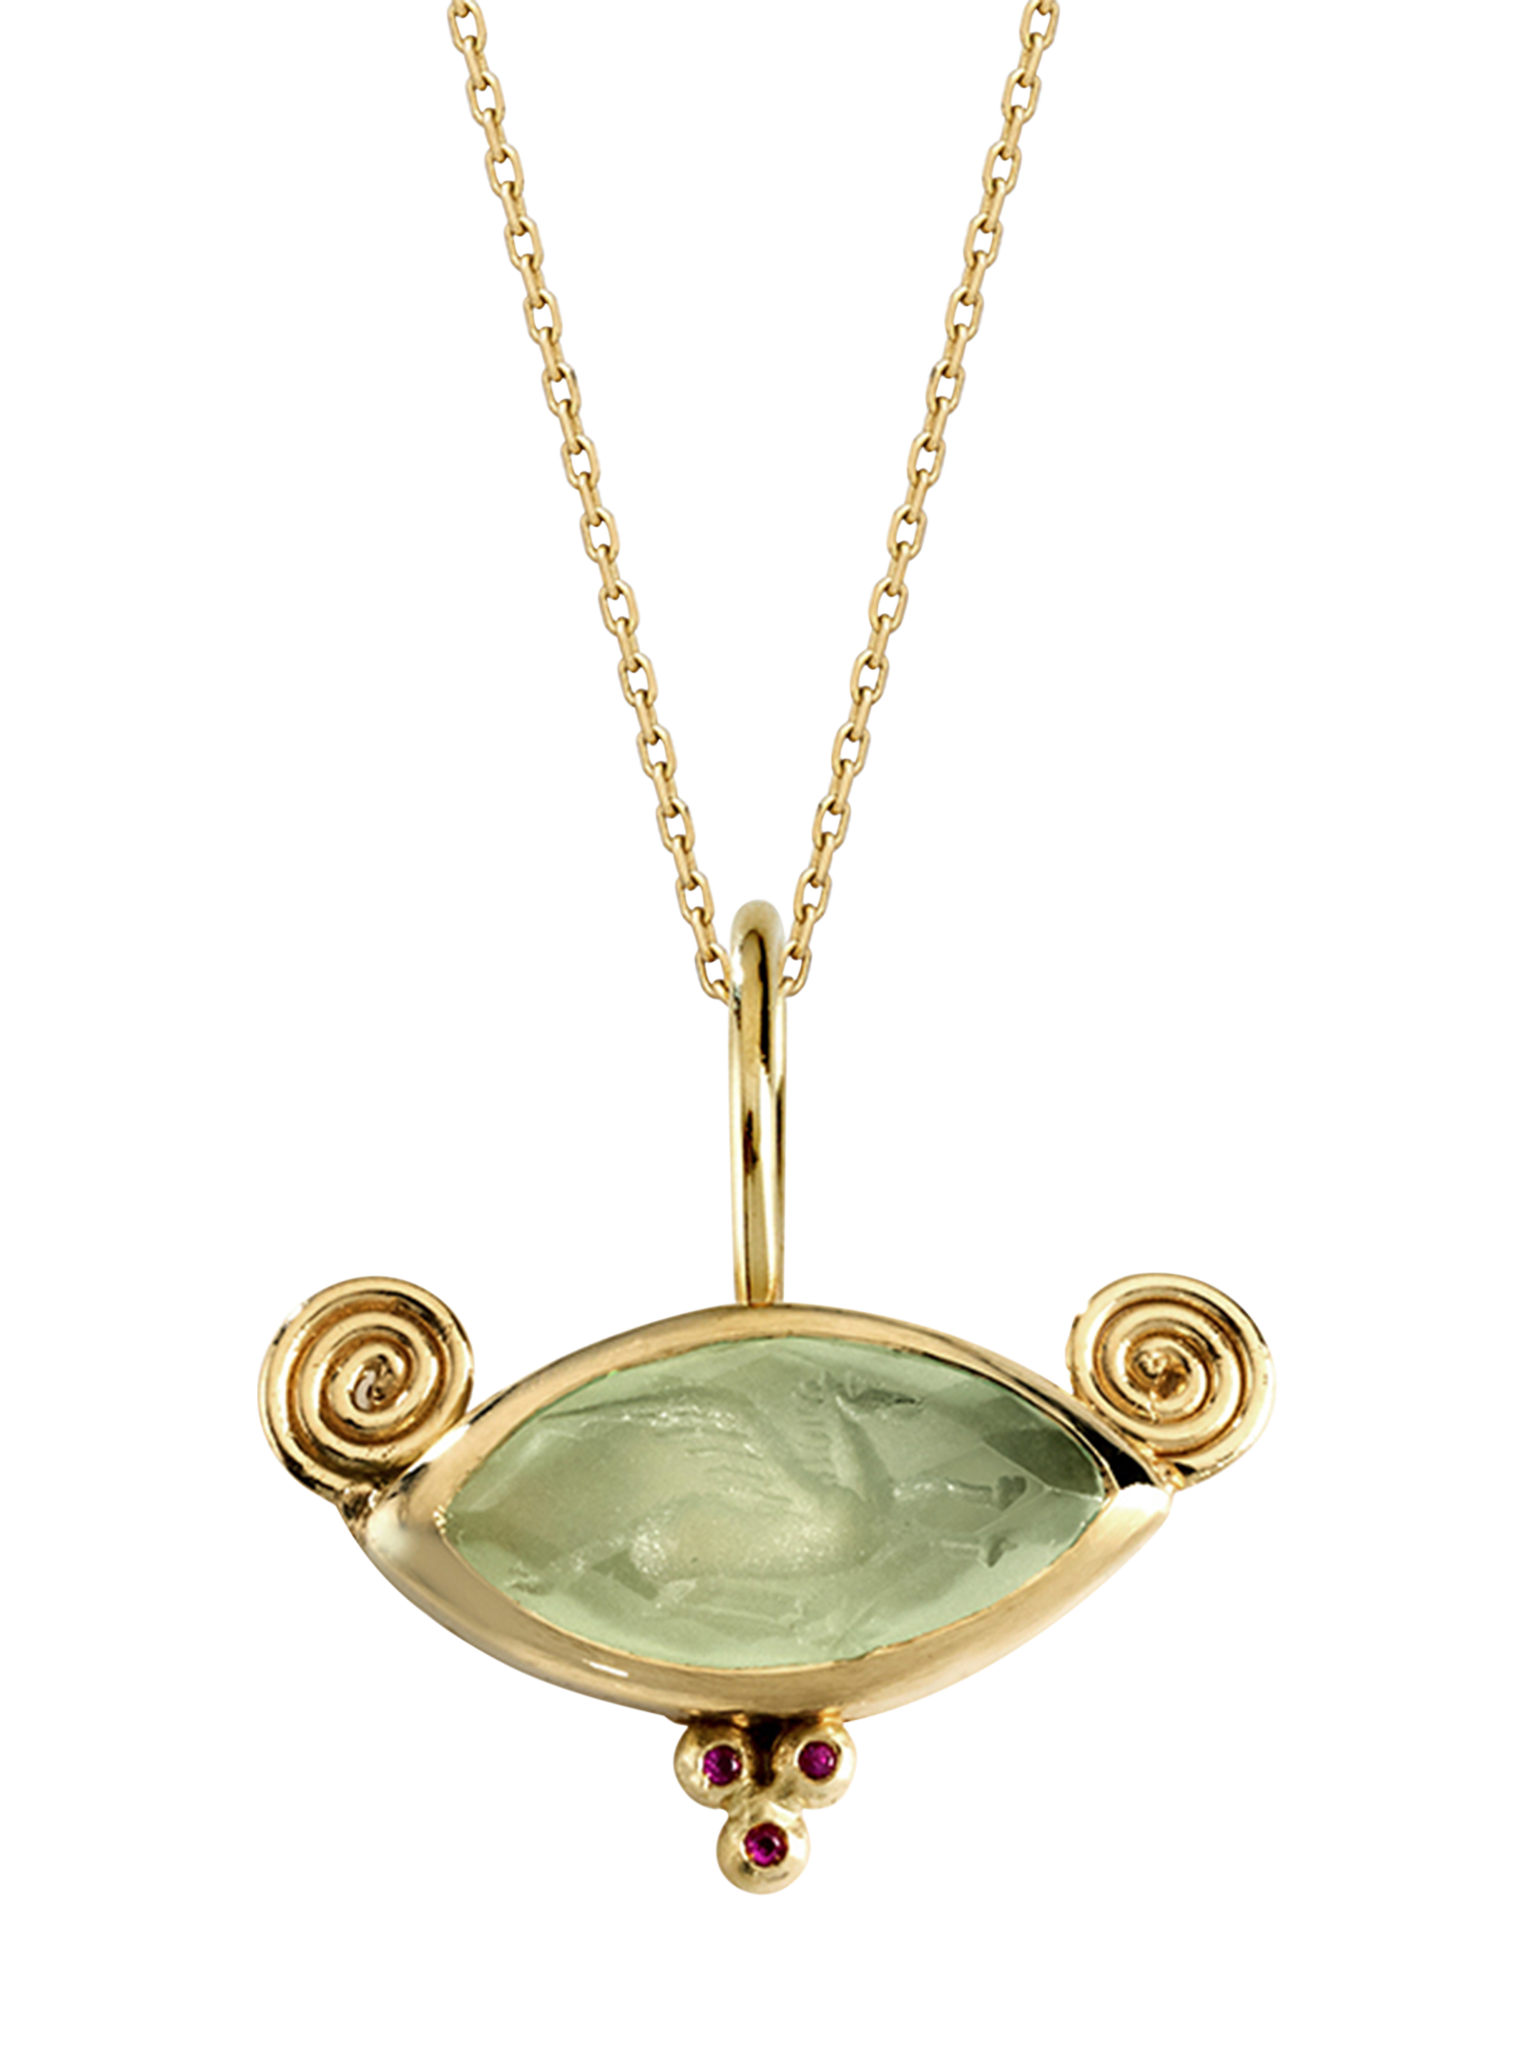 Alcyone pendant - 18k solid gold